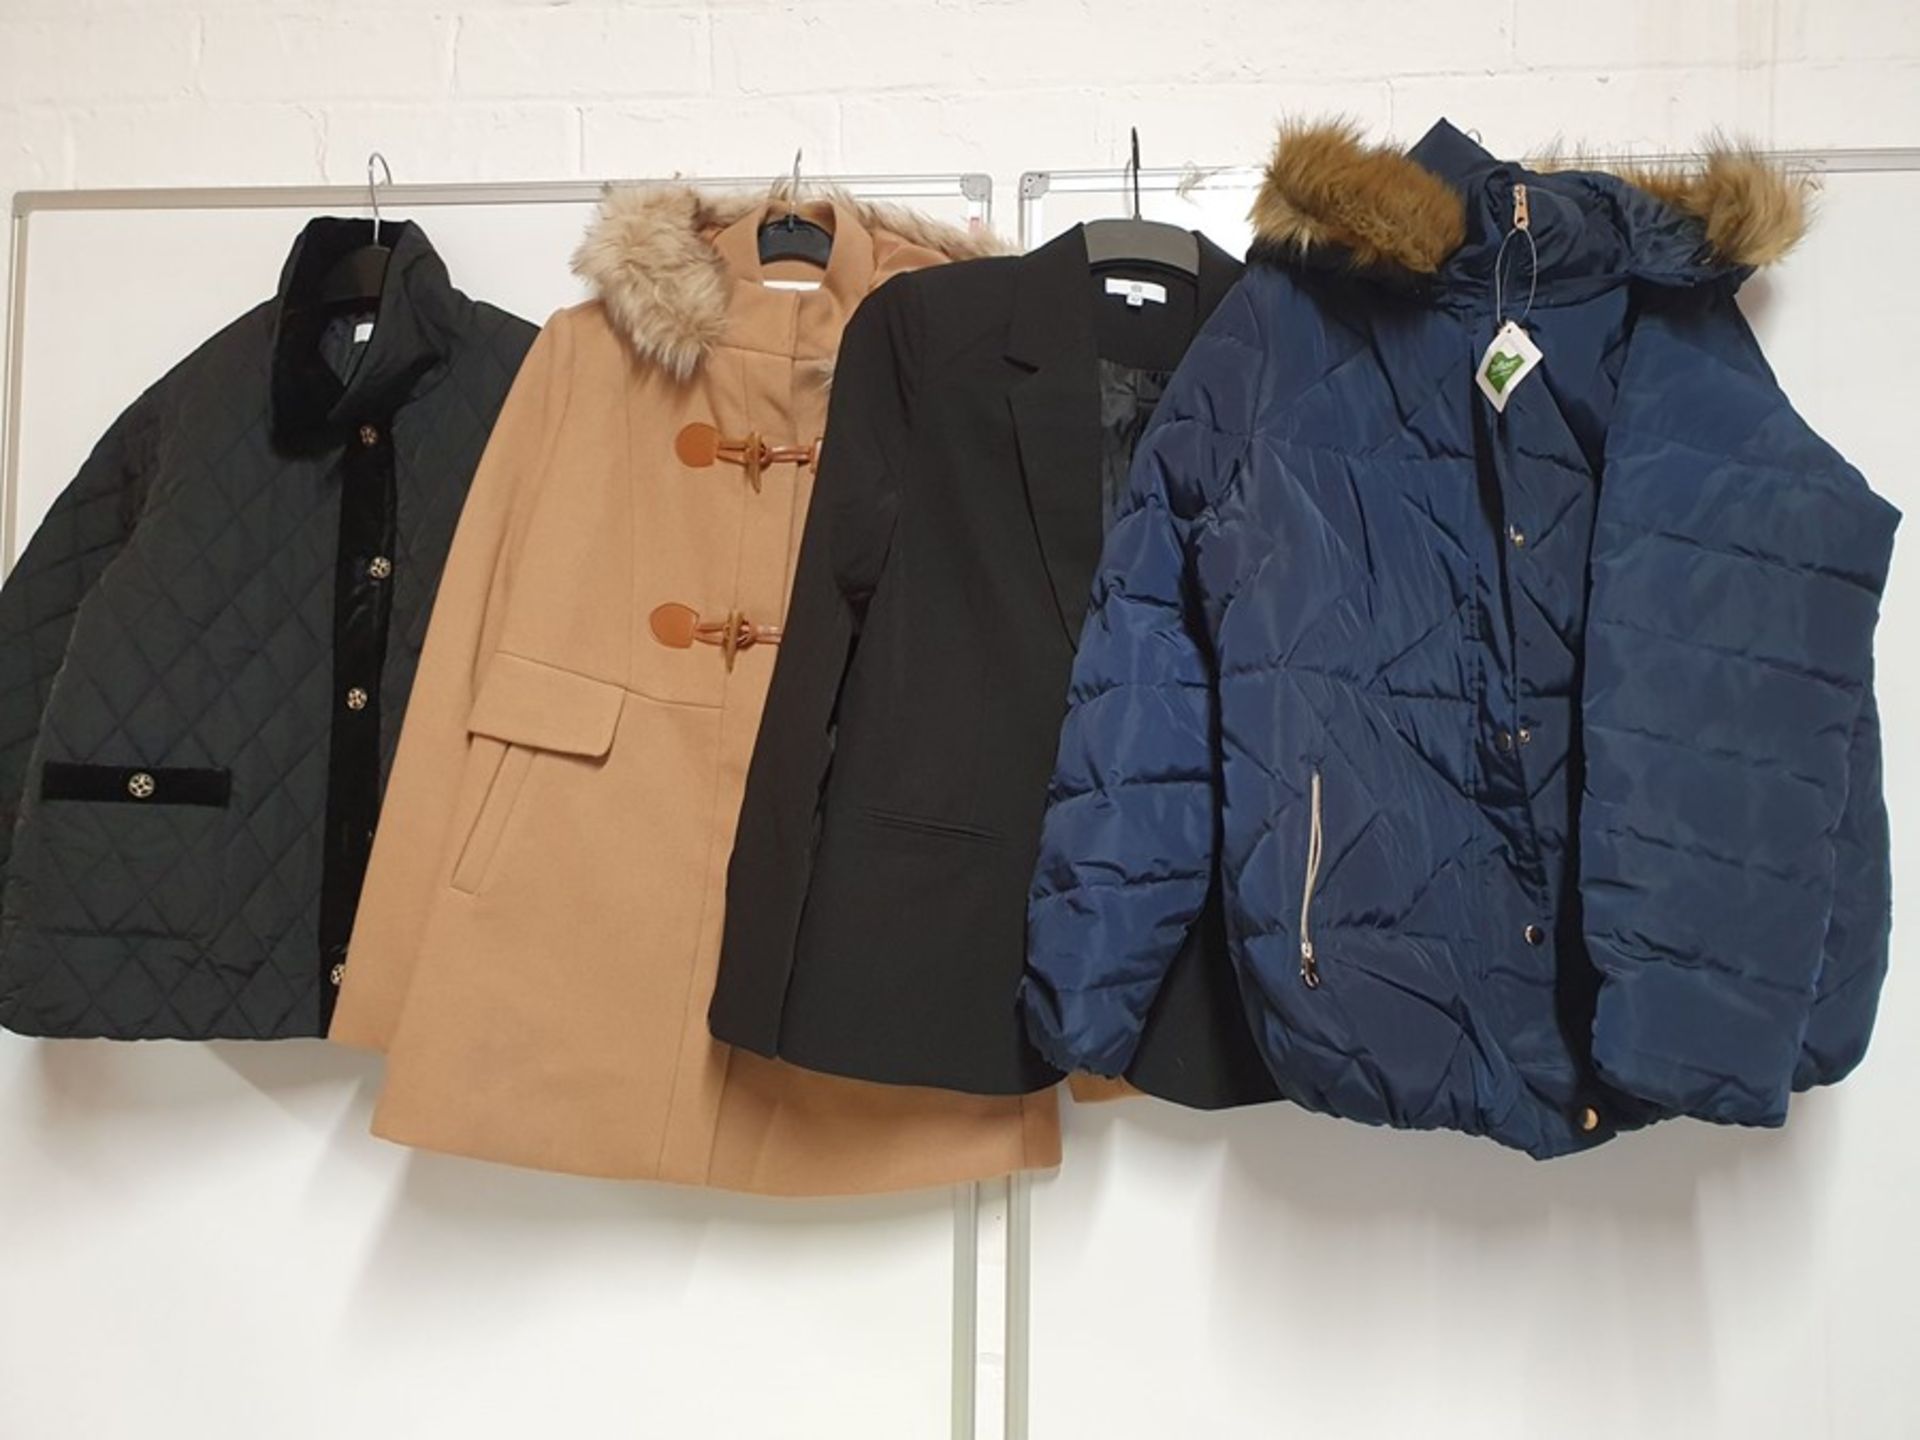 ONE LOT TO CONTAIN ONE BAG OF MIXED LADIES COATS/ JACKETS - 5 ITEMS. (ASSORTED SIZES AND COLOURS,